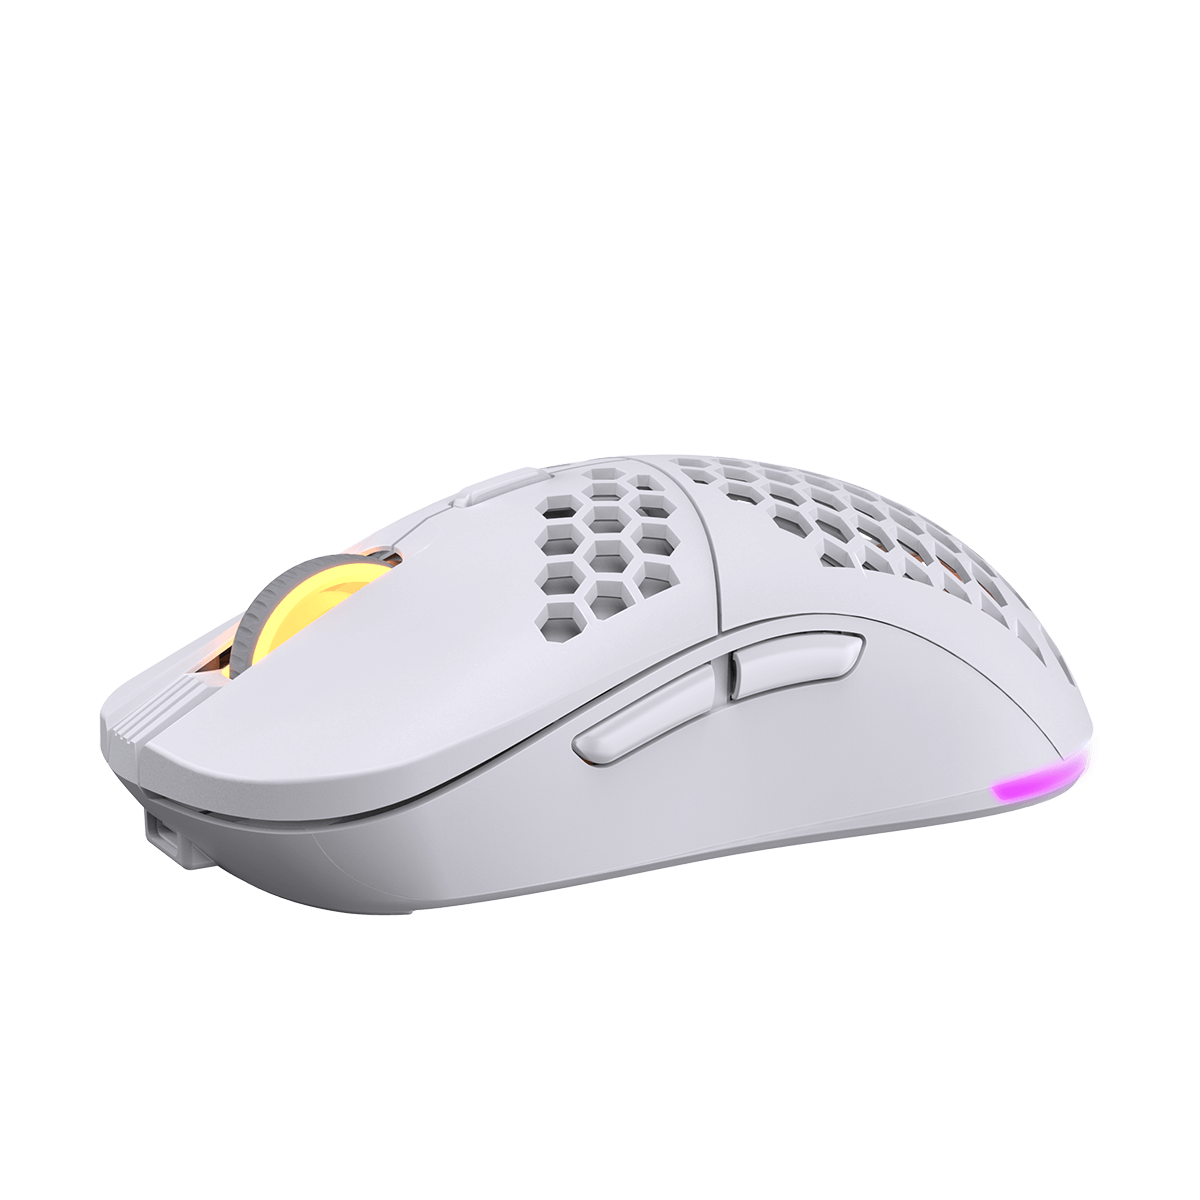 LTC Mosh Pit RGB Wireless/Wired Gaming Mouse with Ultra Lightweight Honeycomb Shell